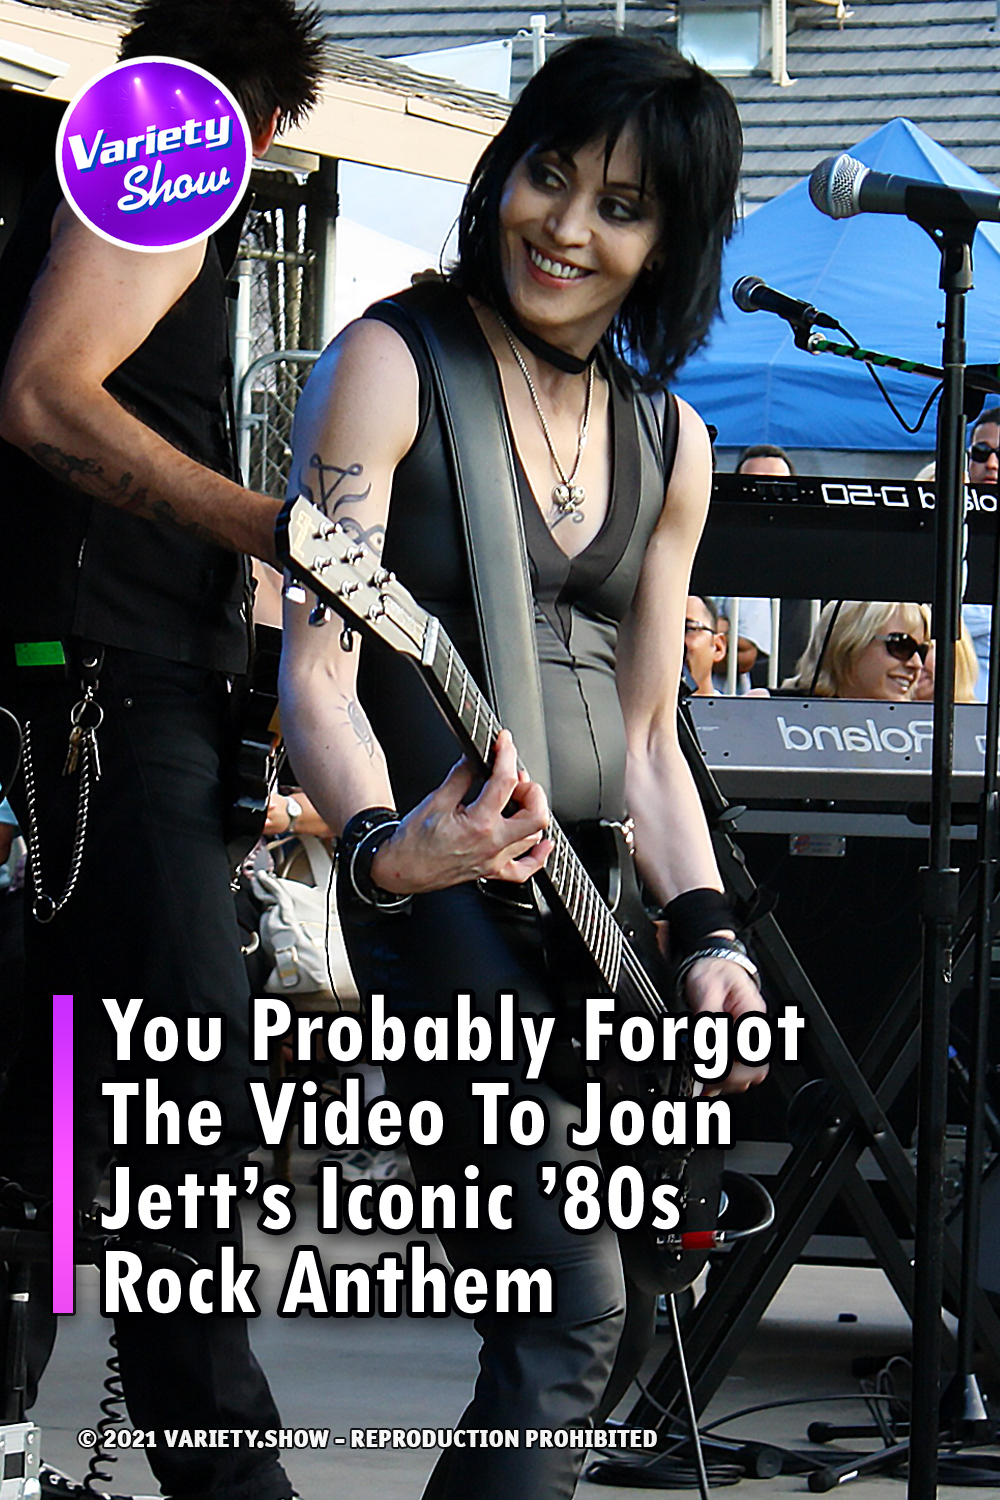 You Probably Forgot The Video To Joan Jett\'s Iconic \'80s Rock Anthem